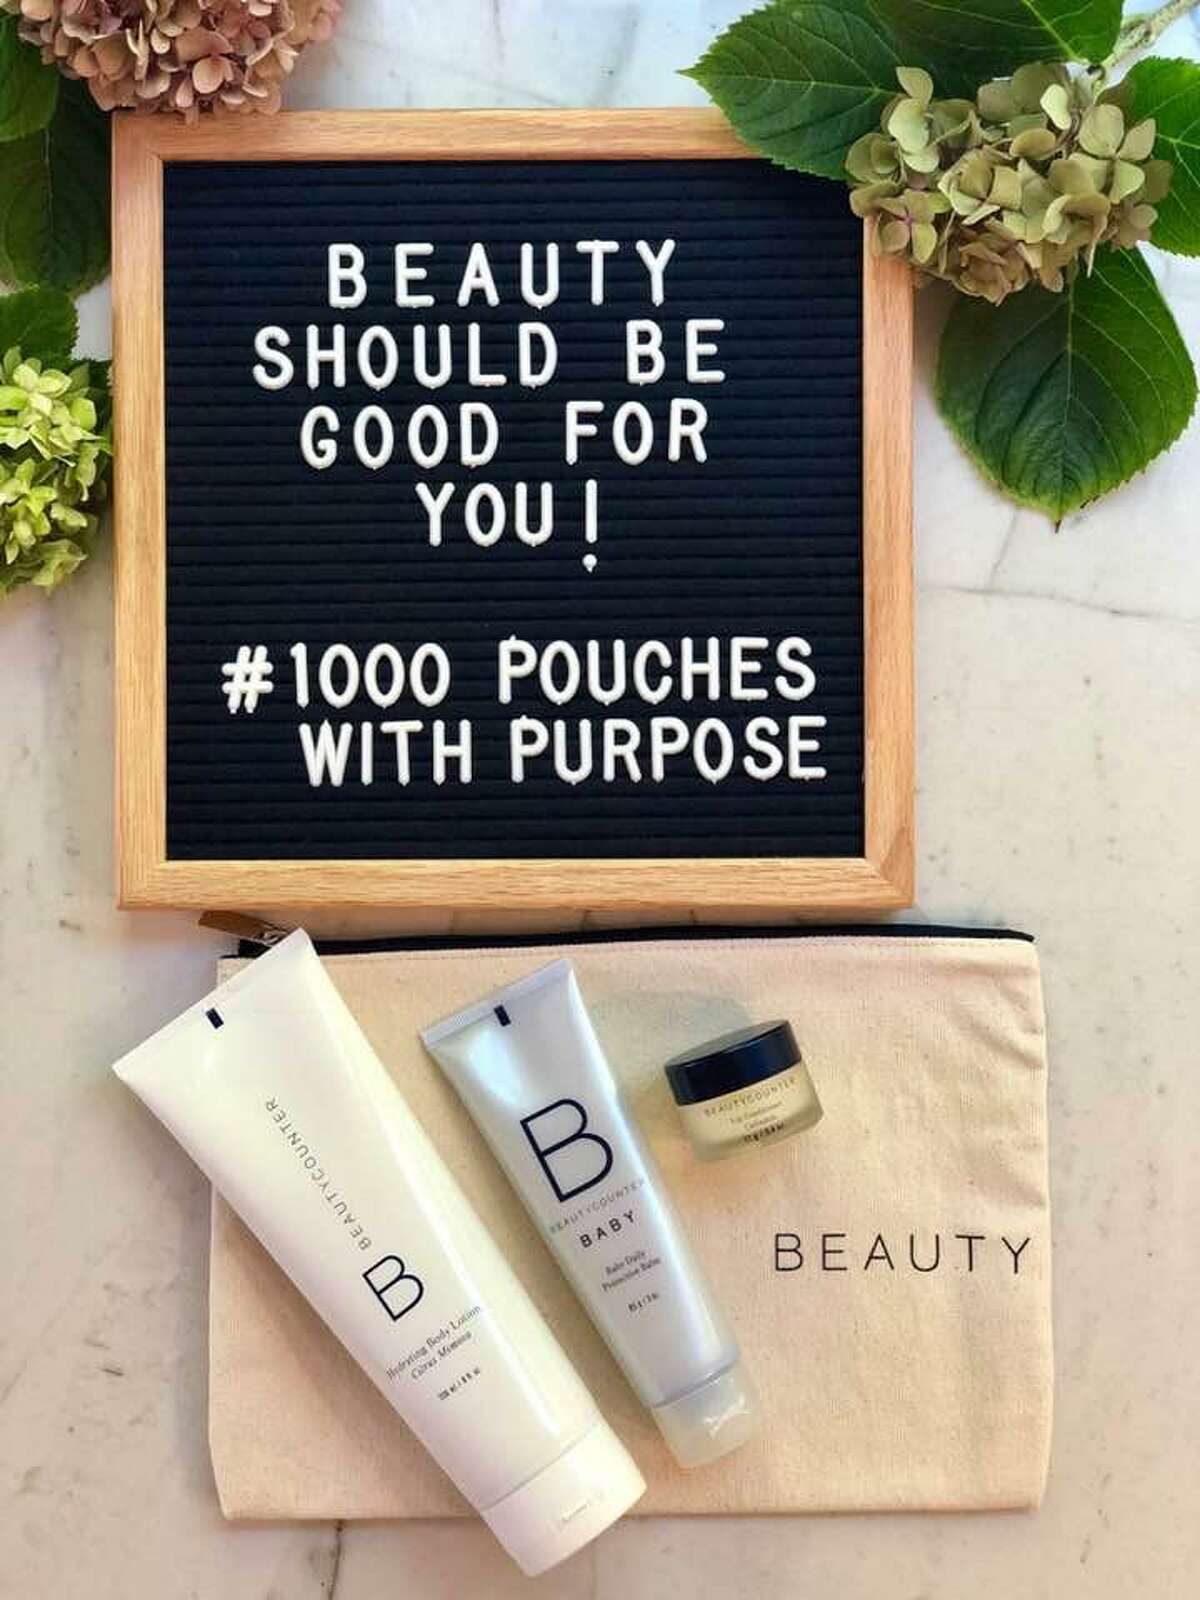 Two consultants from Beautycounter, a company that makes and promotes safe beauty products, will present 50 Pouches with a Purpose to the patients of the Norma Pfriem Breast Center, part of Smilow Cancer Hospital, at 1:30 p.m. Wednesday, OCt. 24, 2018.